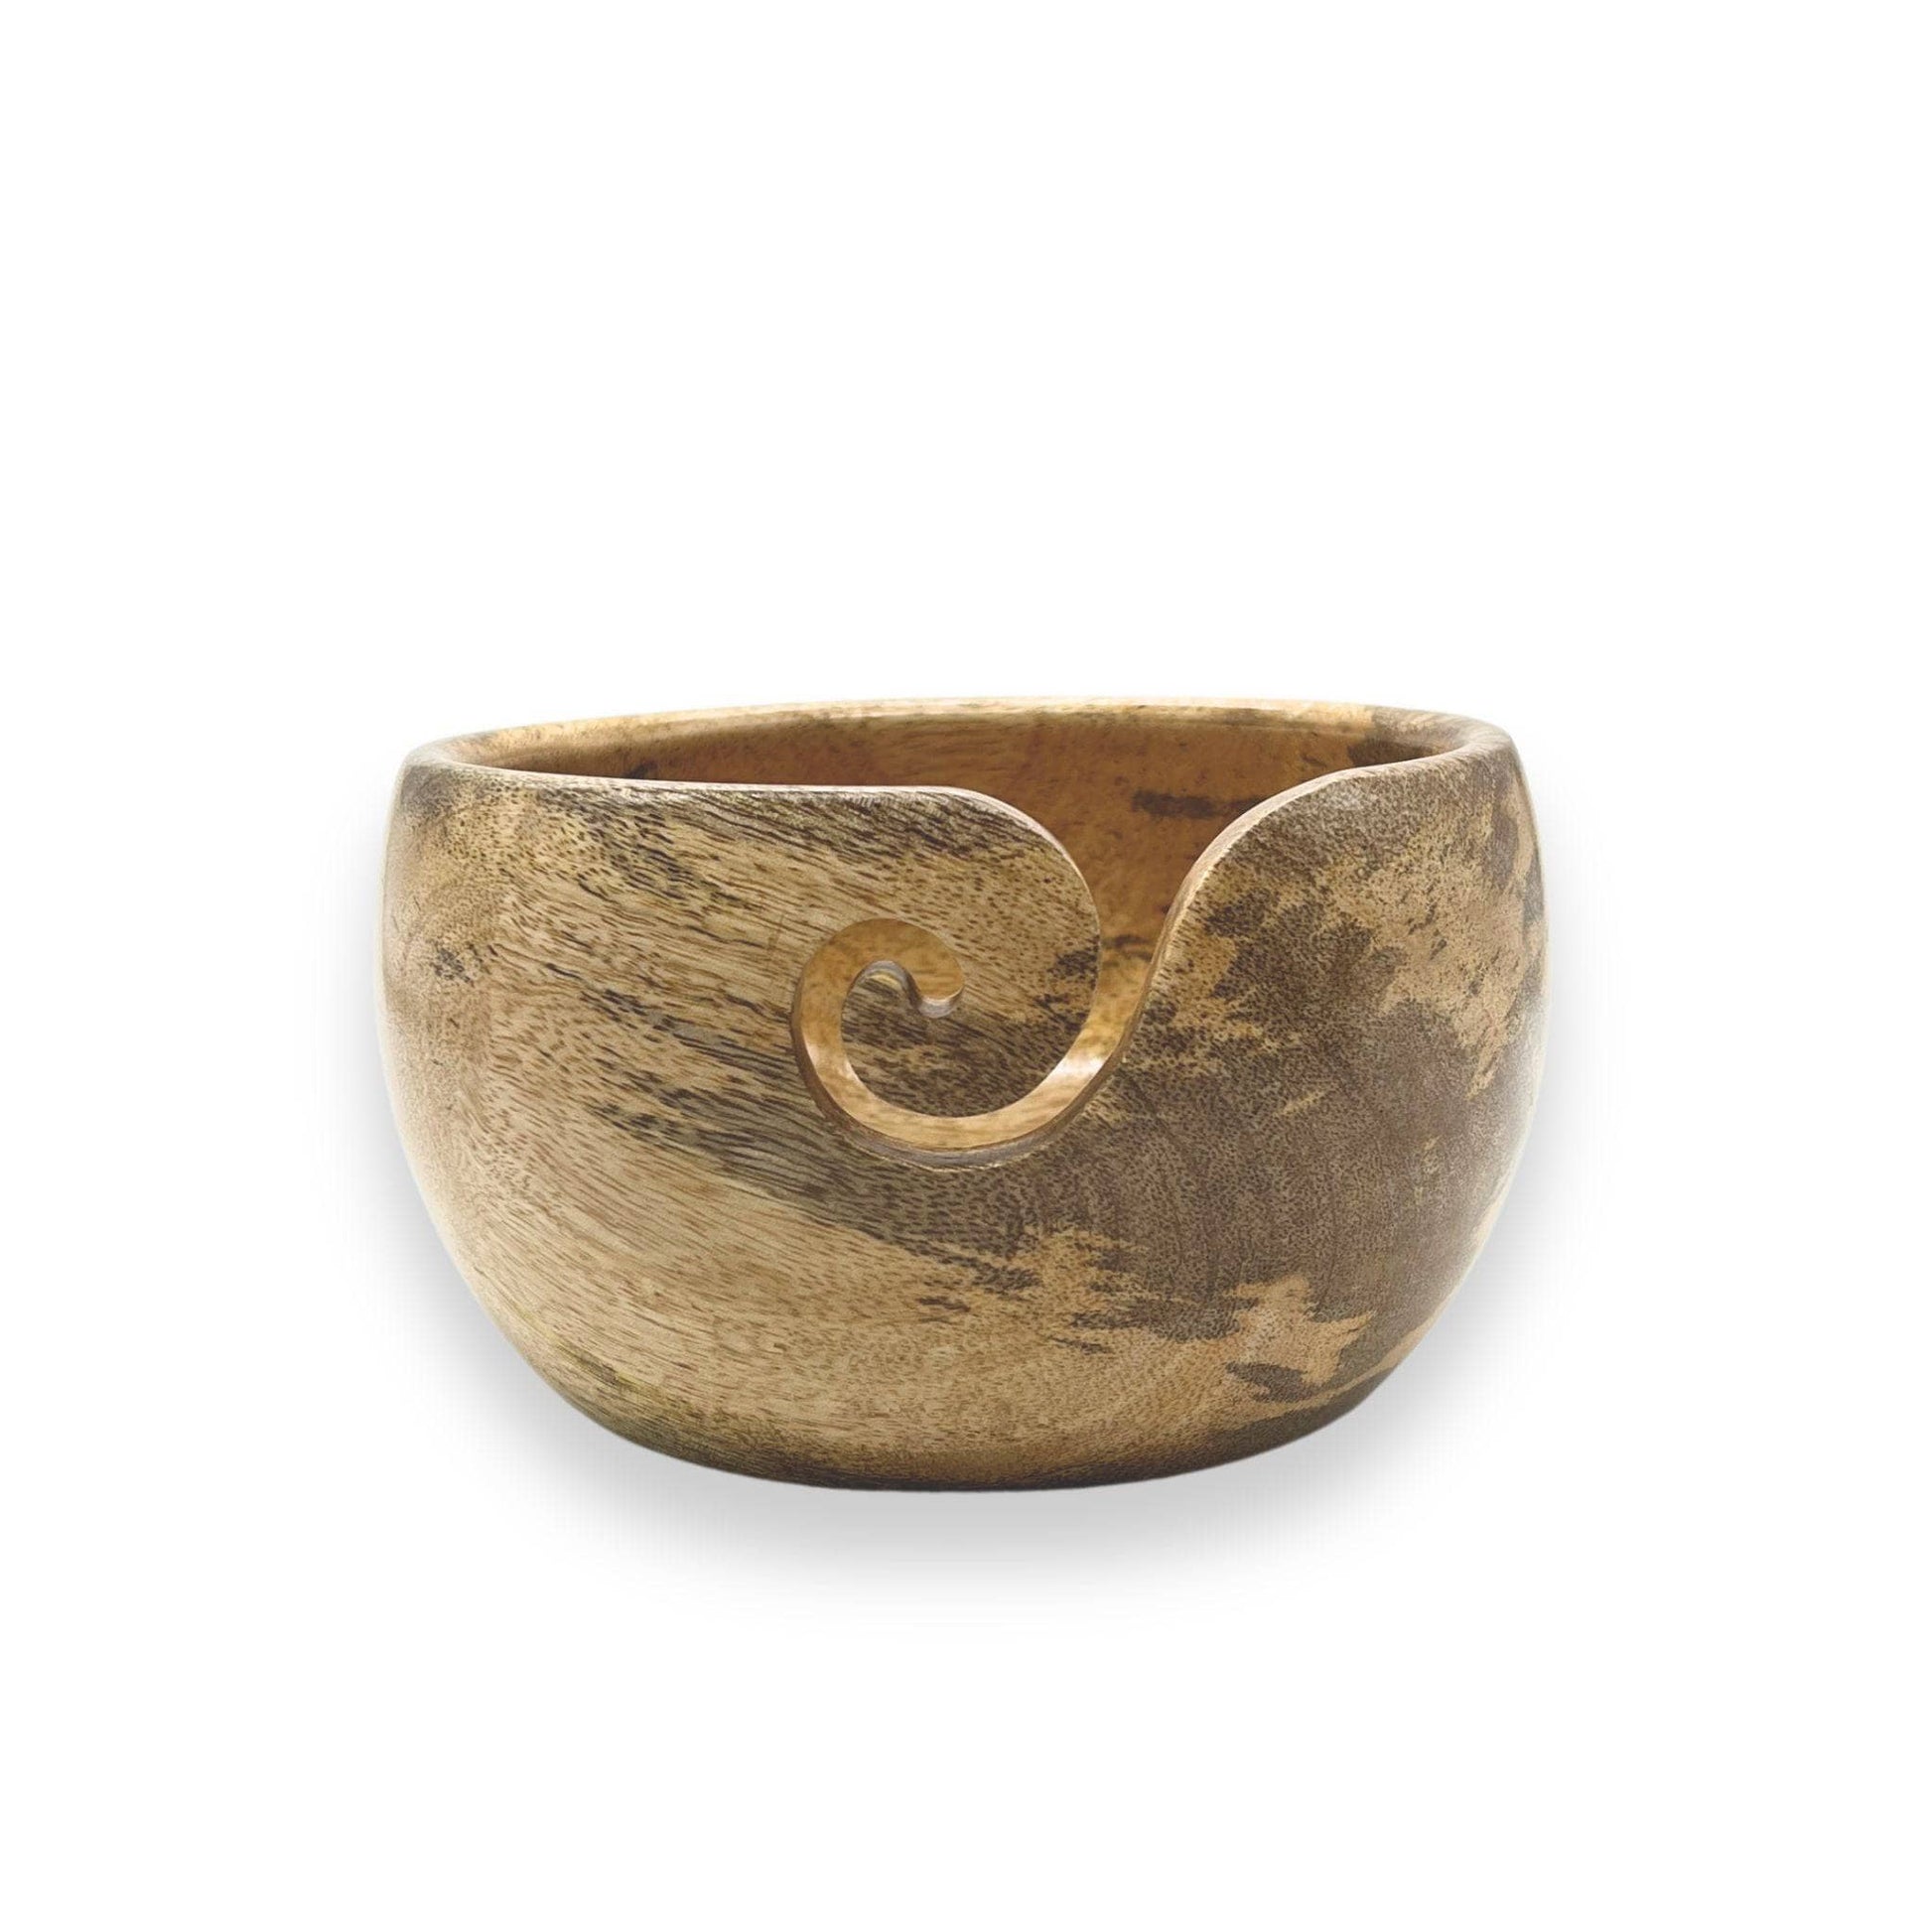 Natural light wood yarn bowl with a darker wood grain on parts of the yarn bowl